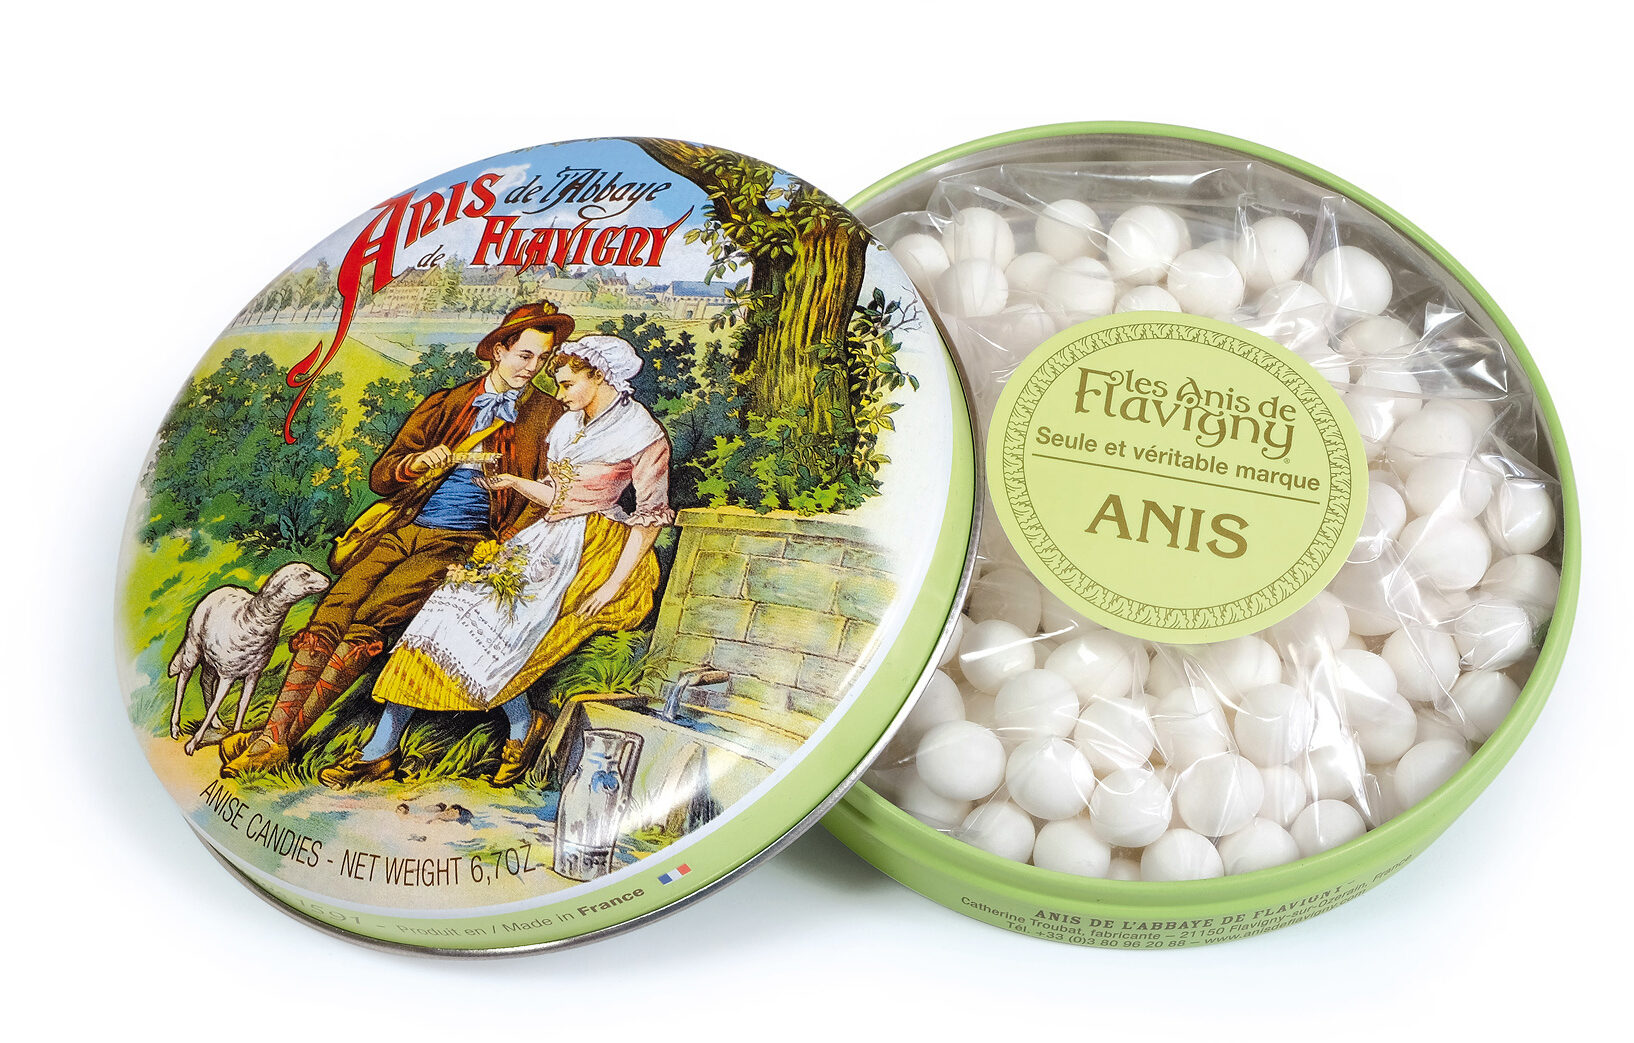 Boite ronde anis usa - Product - fr